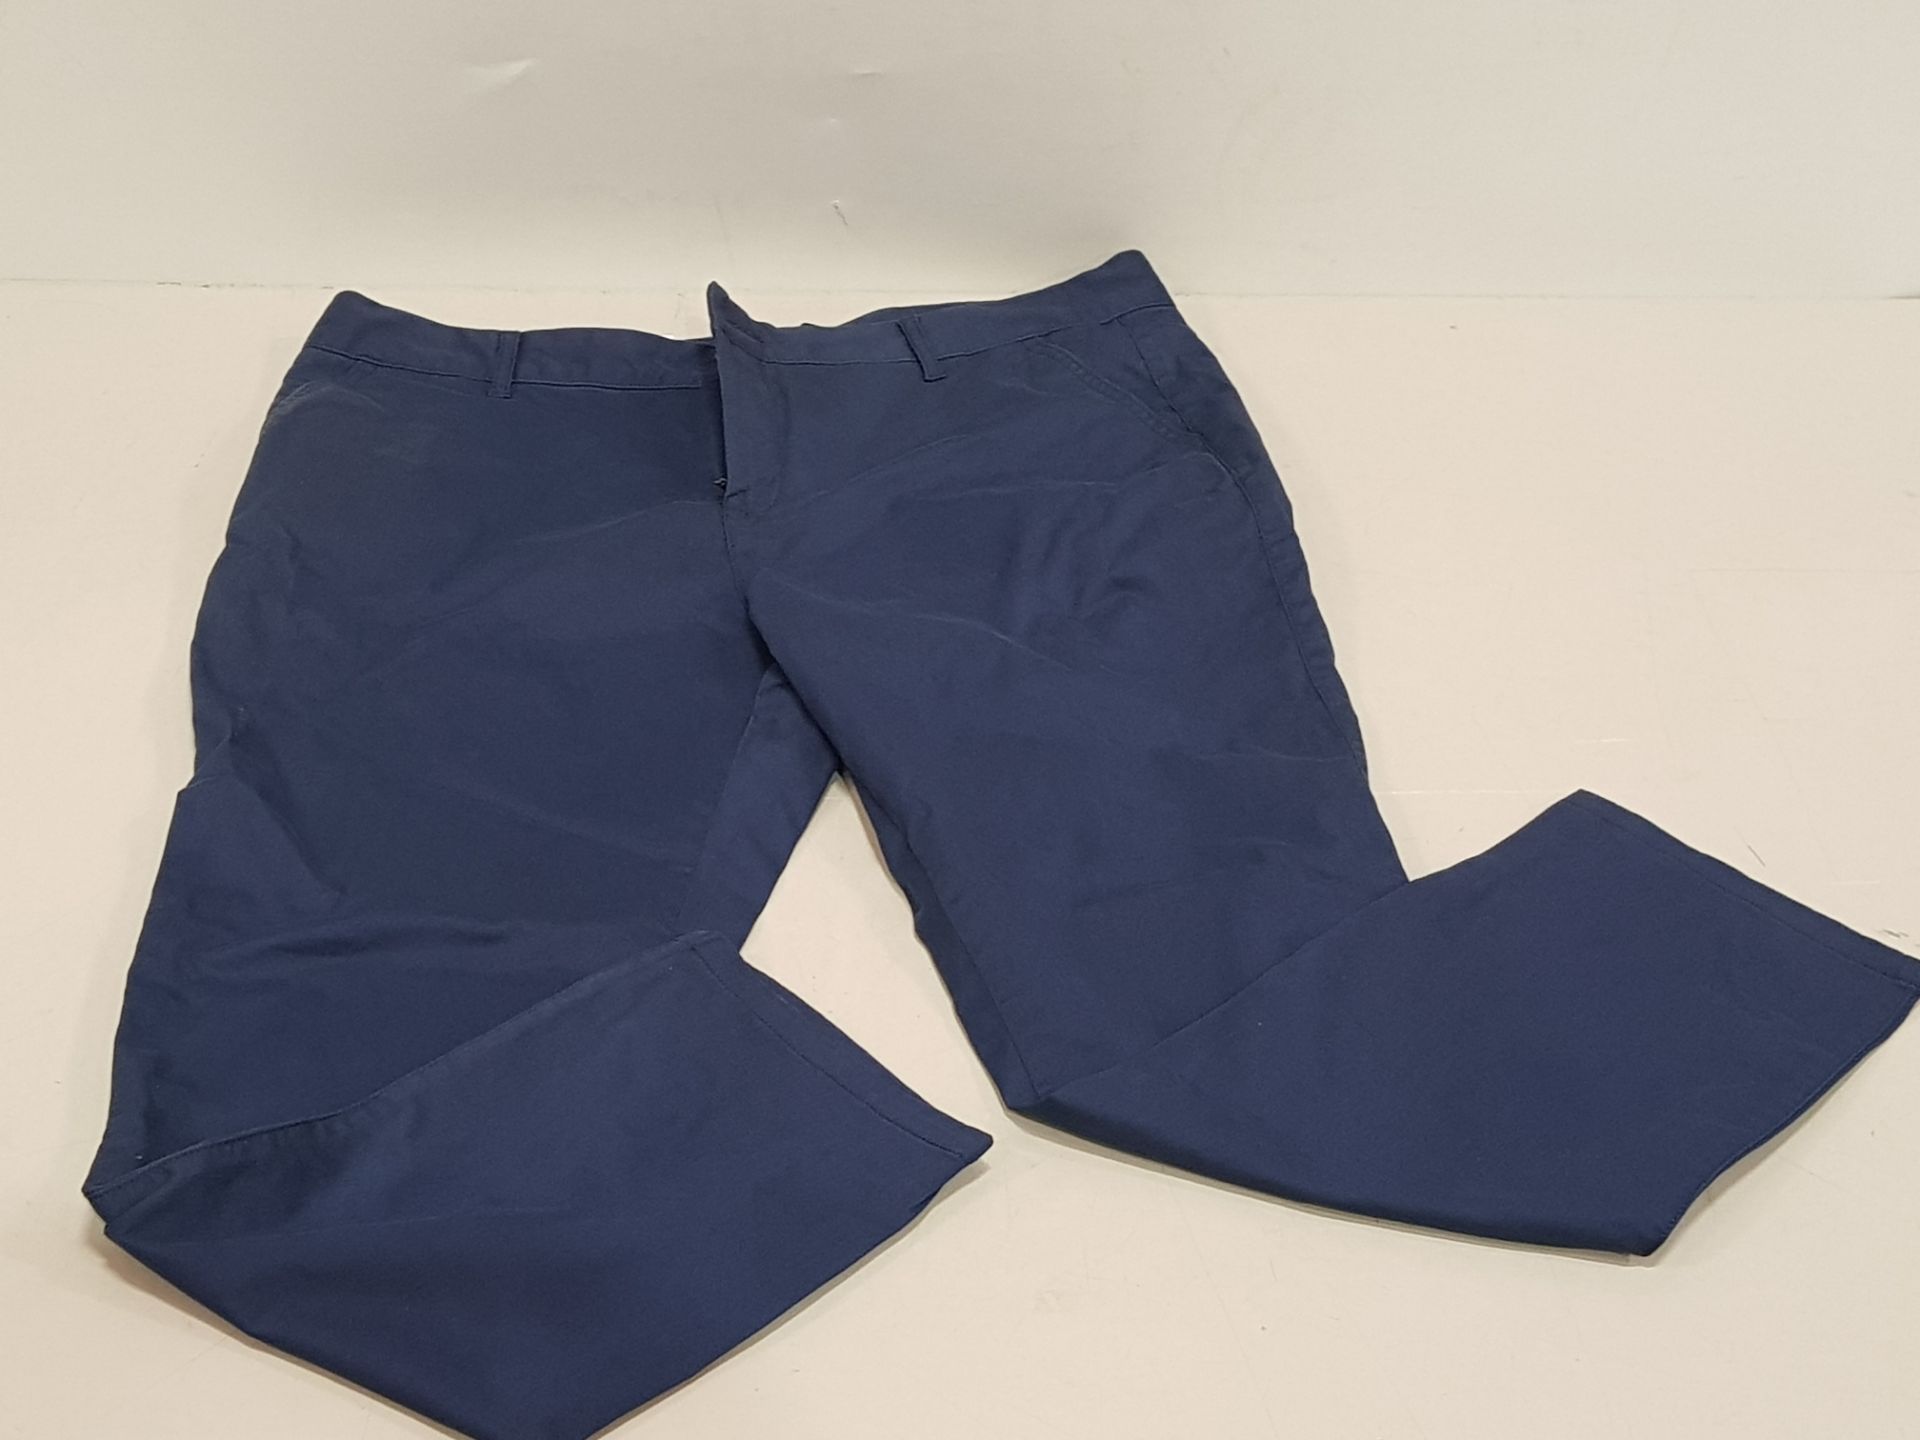 32 X BRAND NEW AEROPOSTALE WOMEN'S CHINO'S IN NAVY BLUE SIZE 30R IN ONE BOX